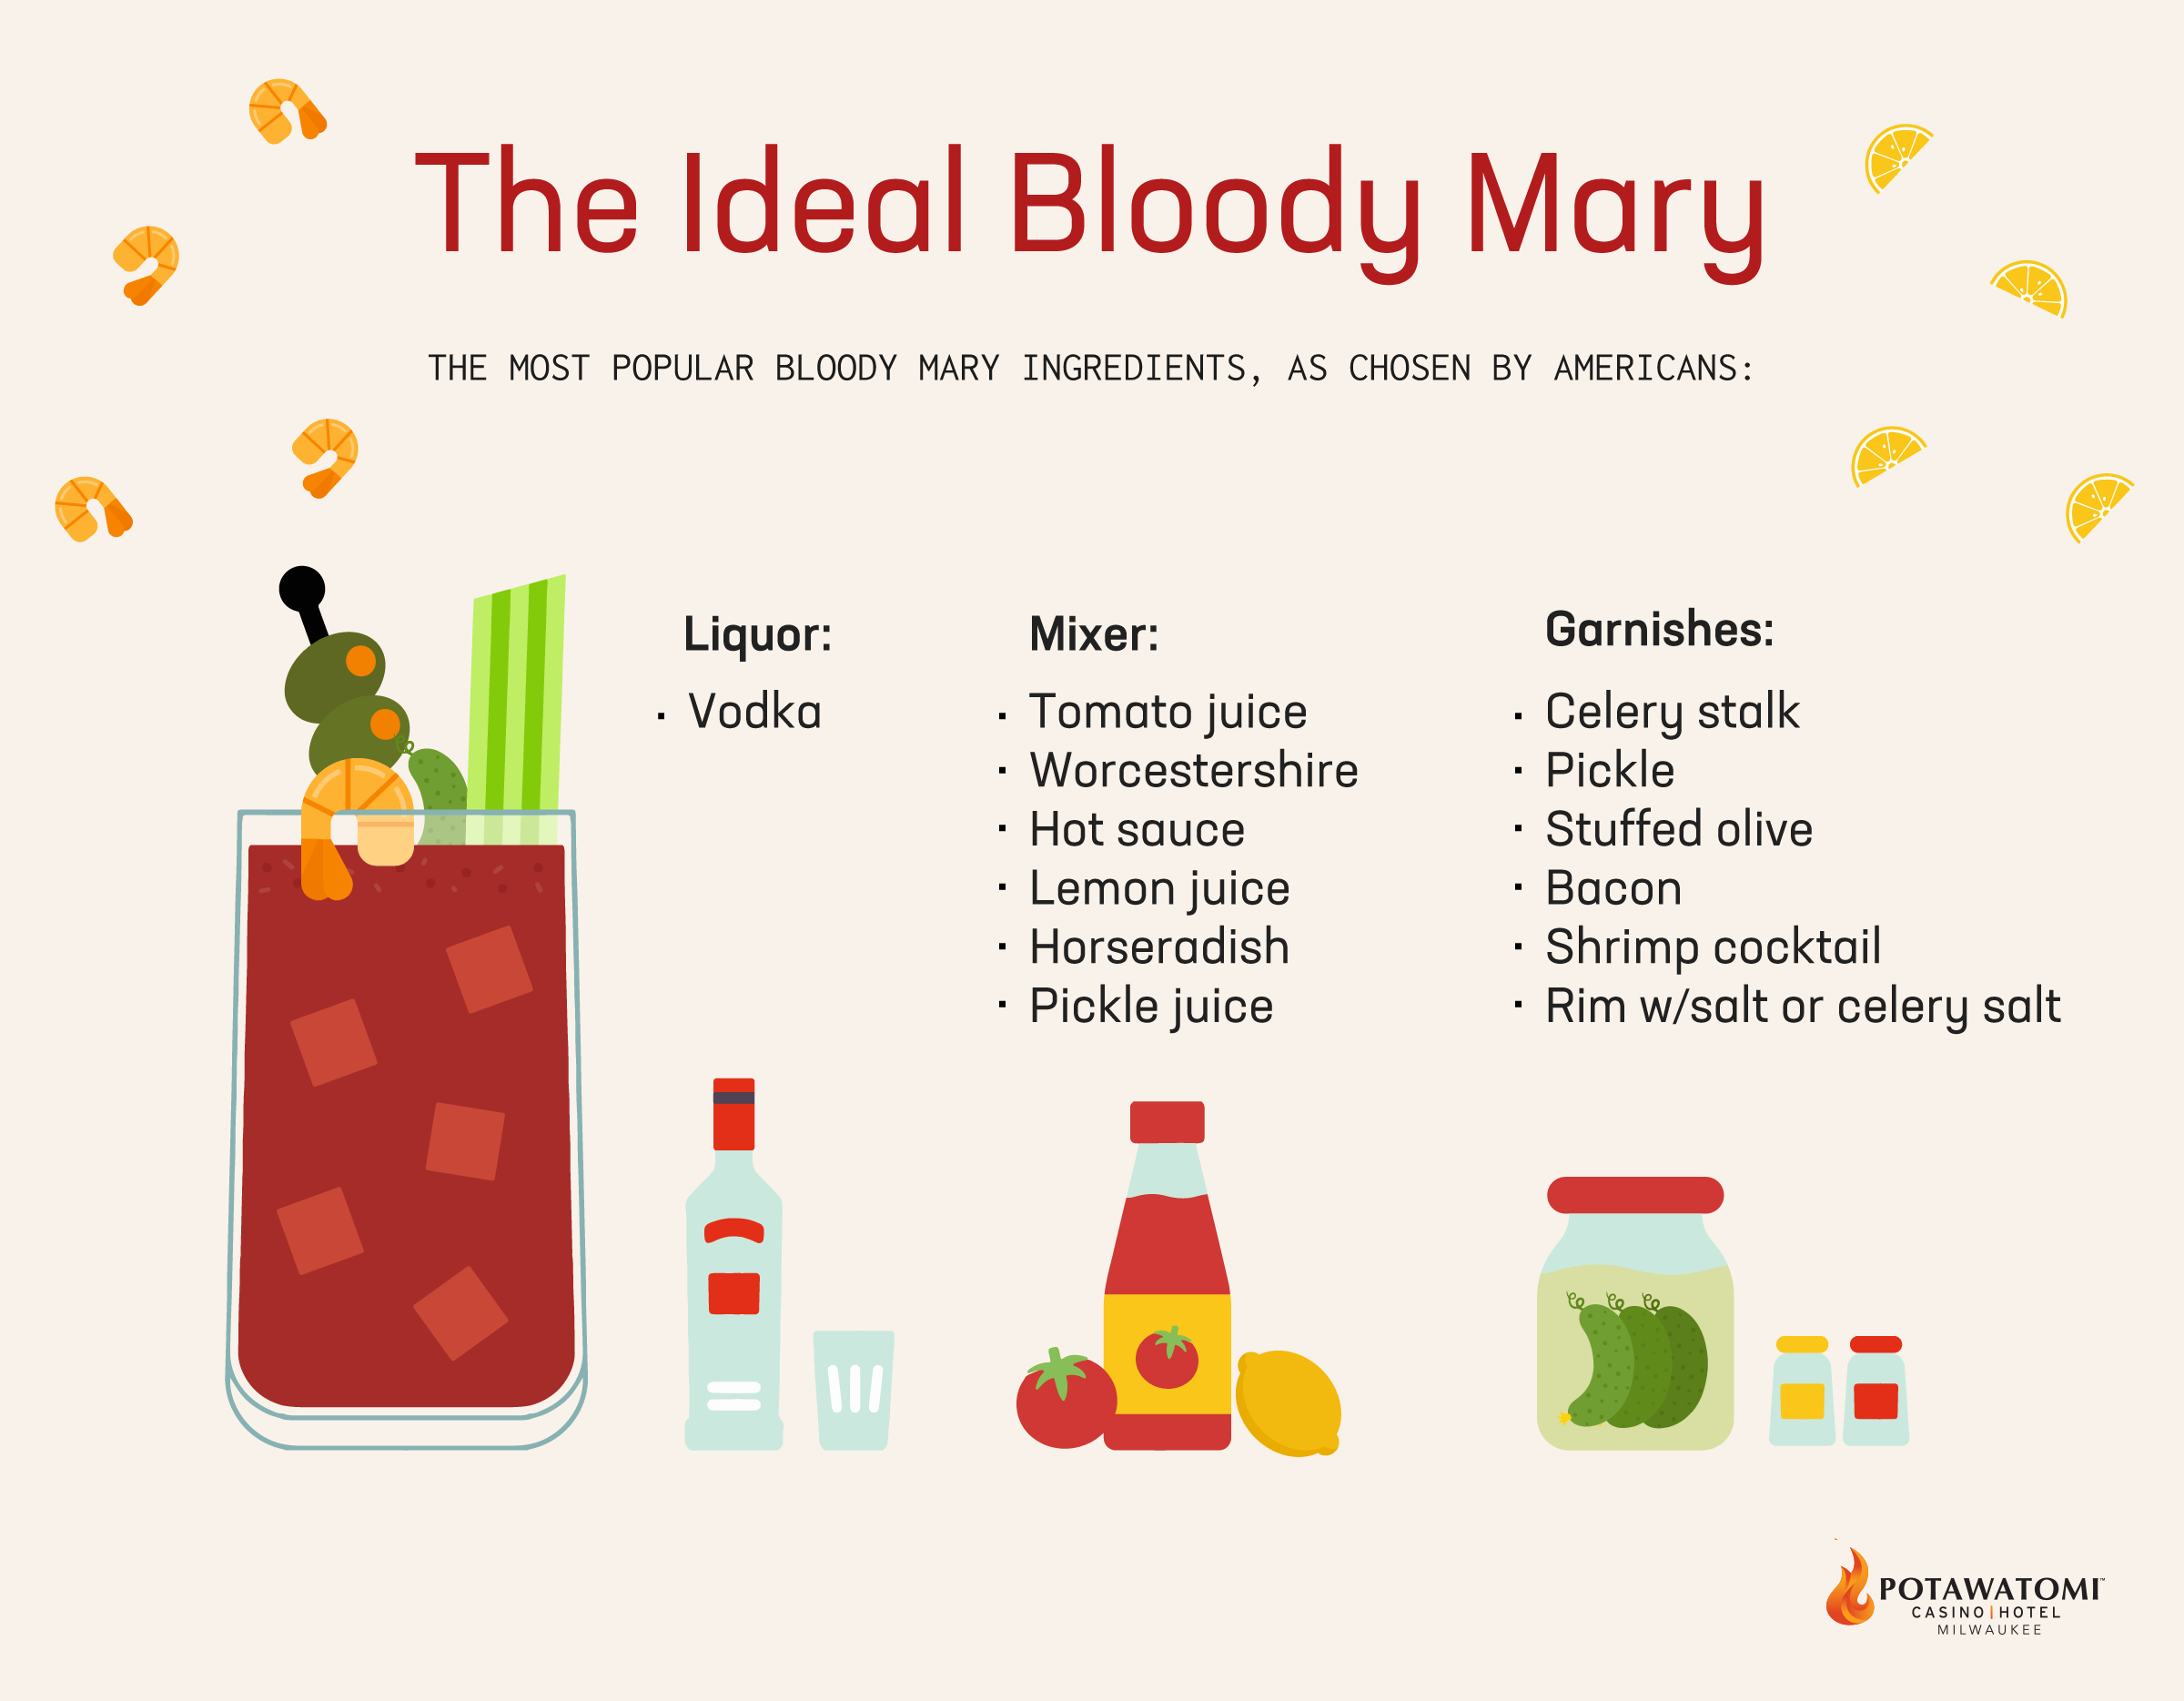 Top ingredients in a Bloody Mary by Survey | New study at paysbig.com